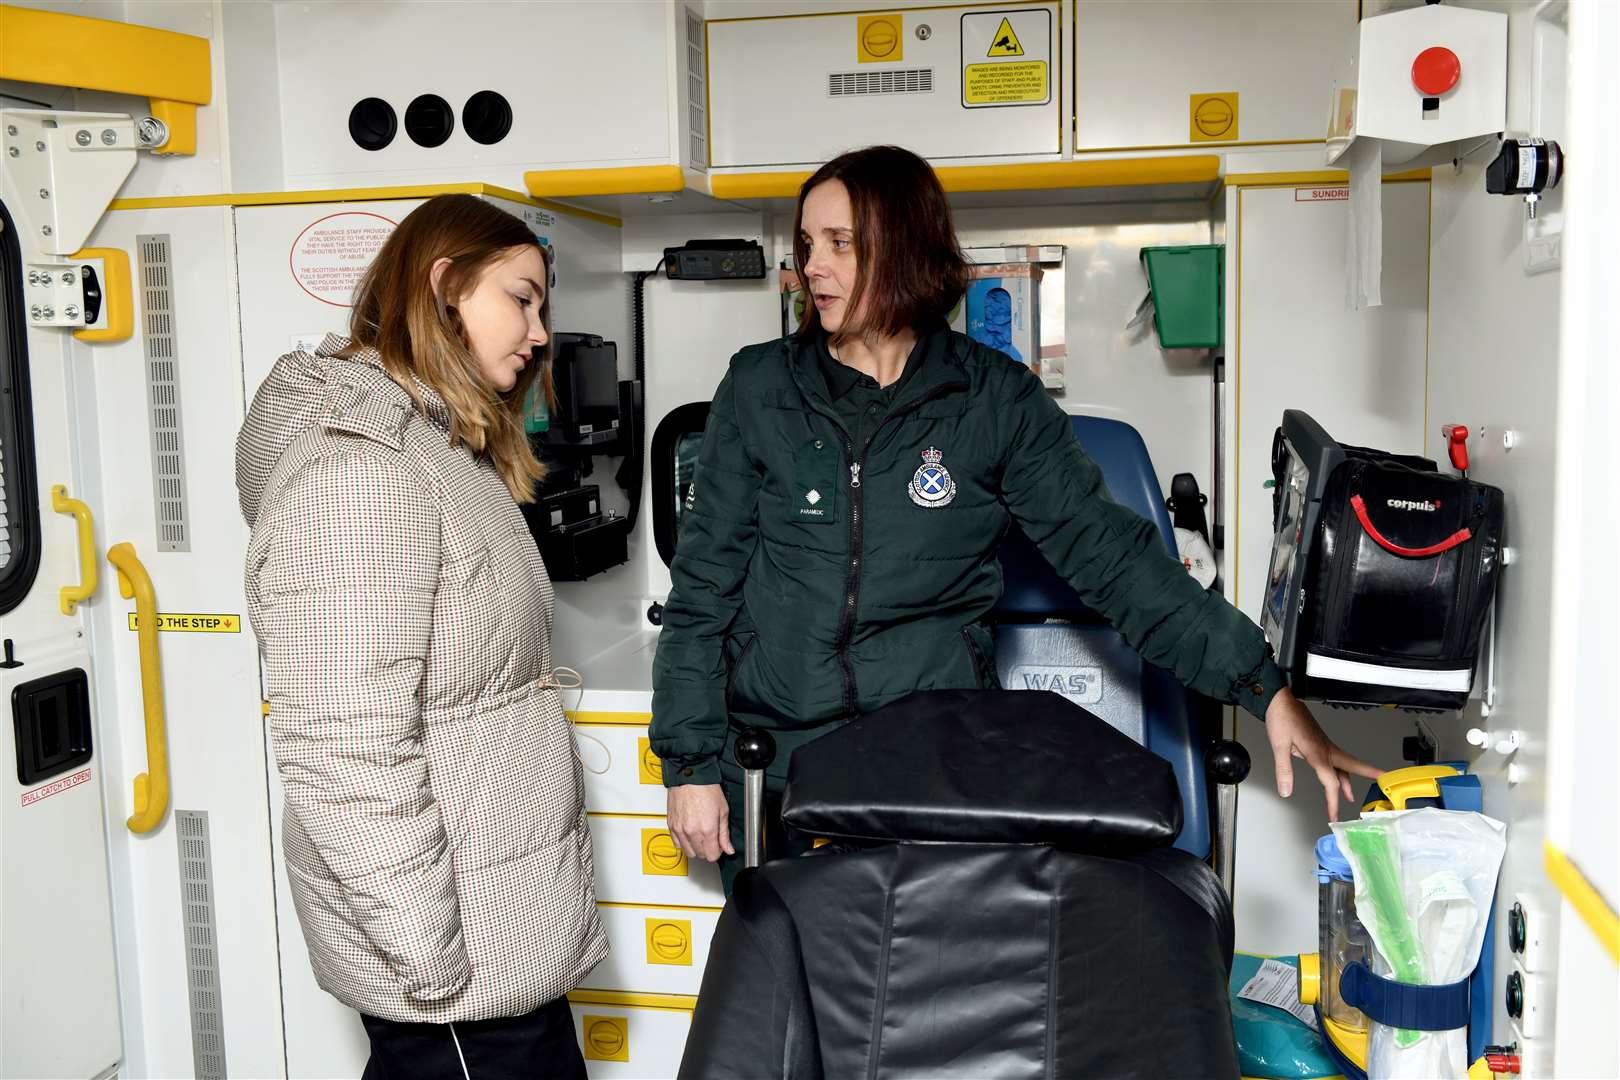 Heather showing Annabelle the equipment in the ambulance.